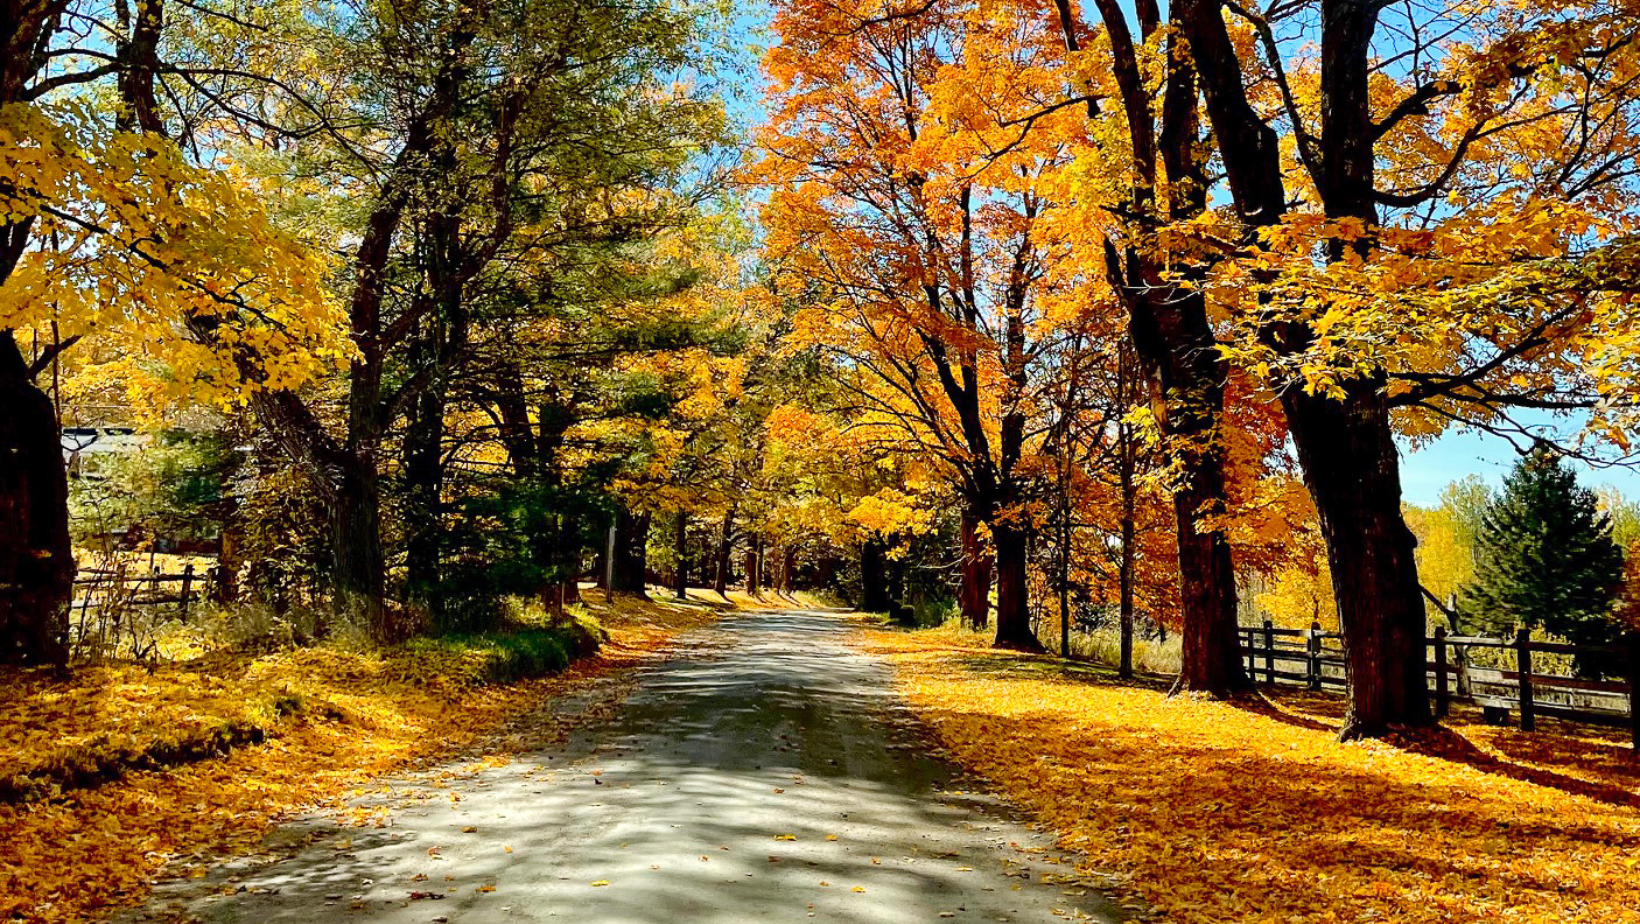 Darling Hill Road in the fall covered in yellow and orange leaves